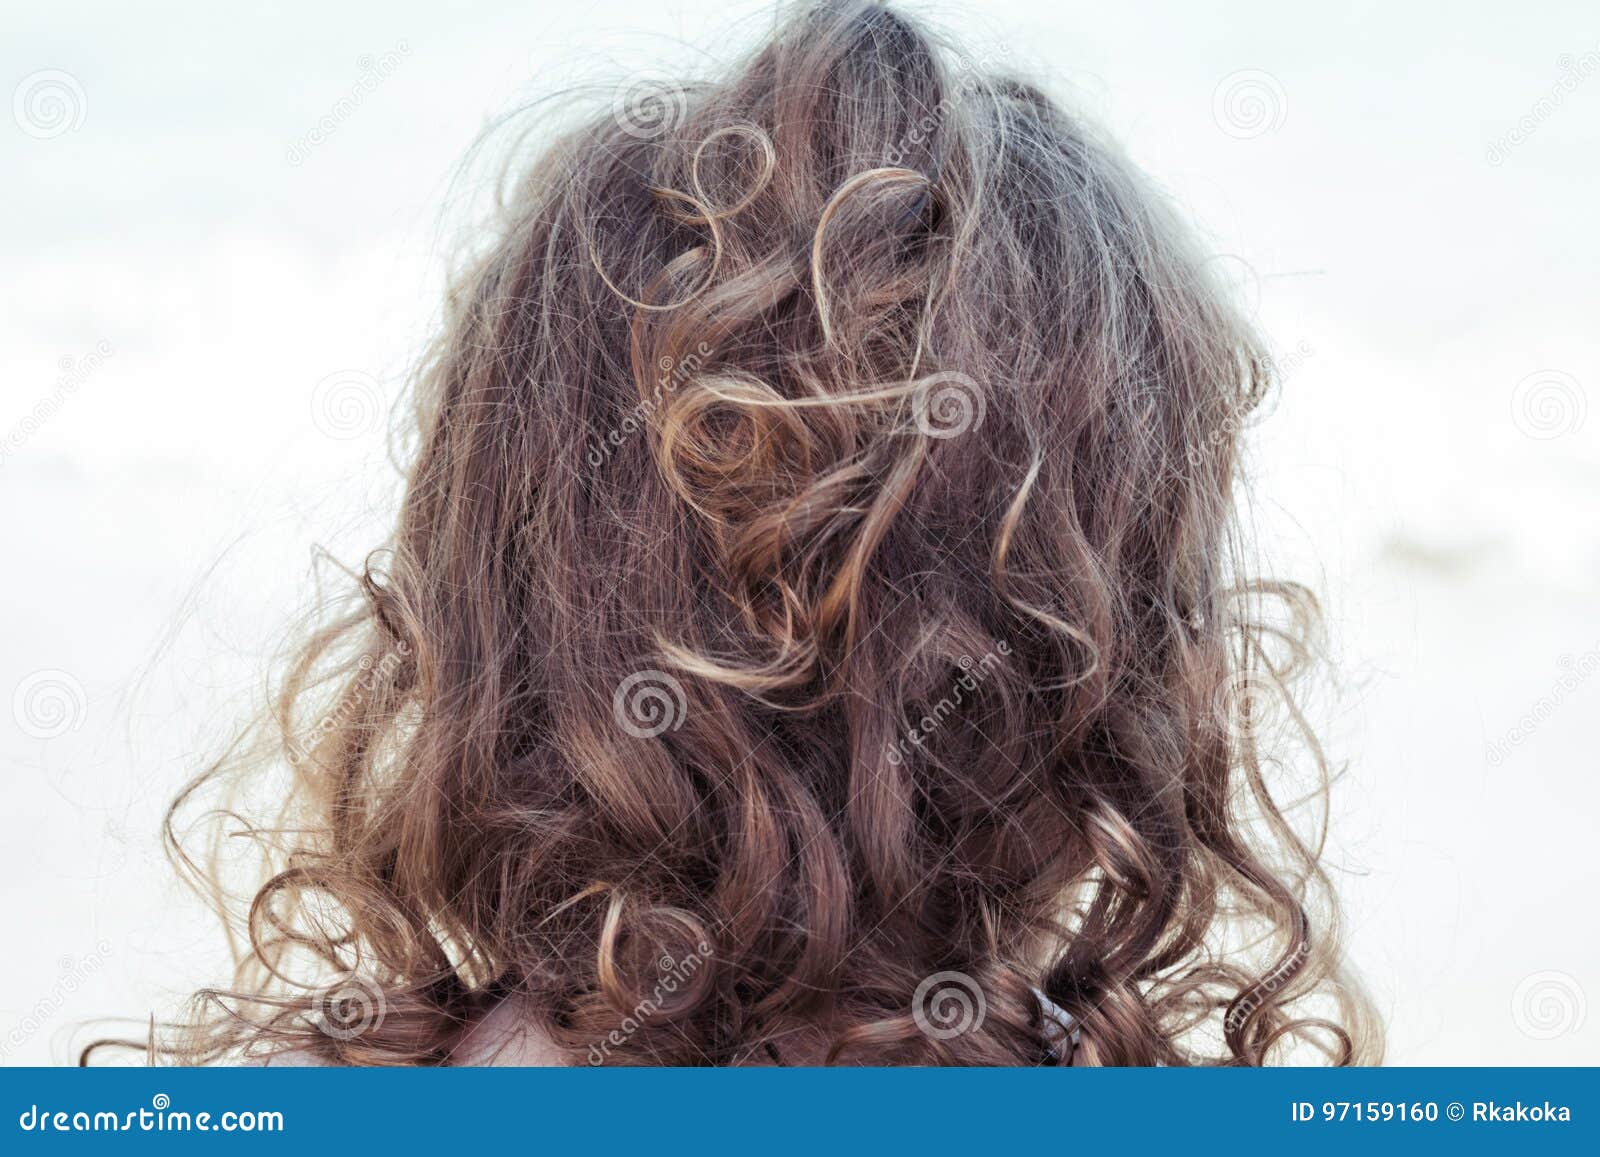 Wild Curly Blonde Tangled Hair Of A Toddler View From The Back Of